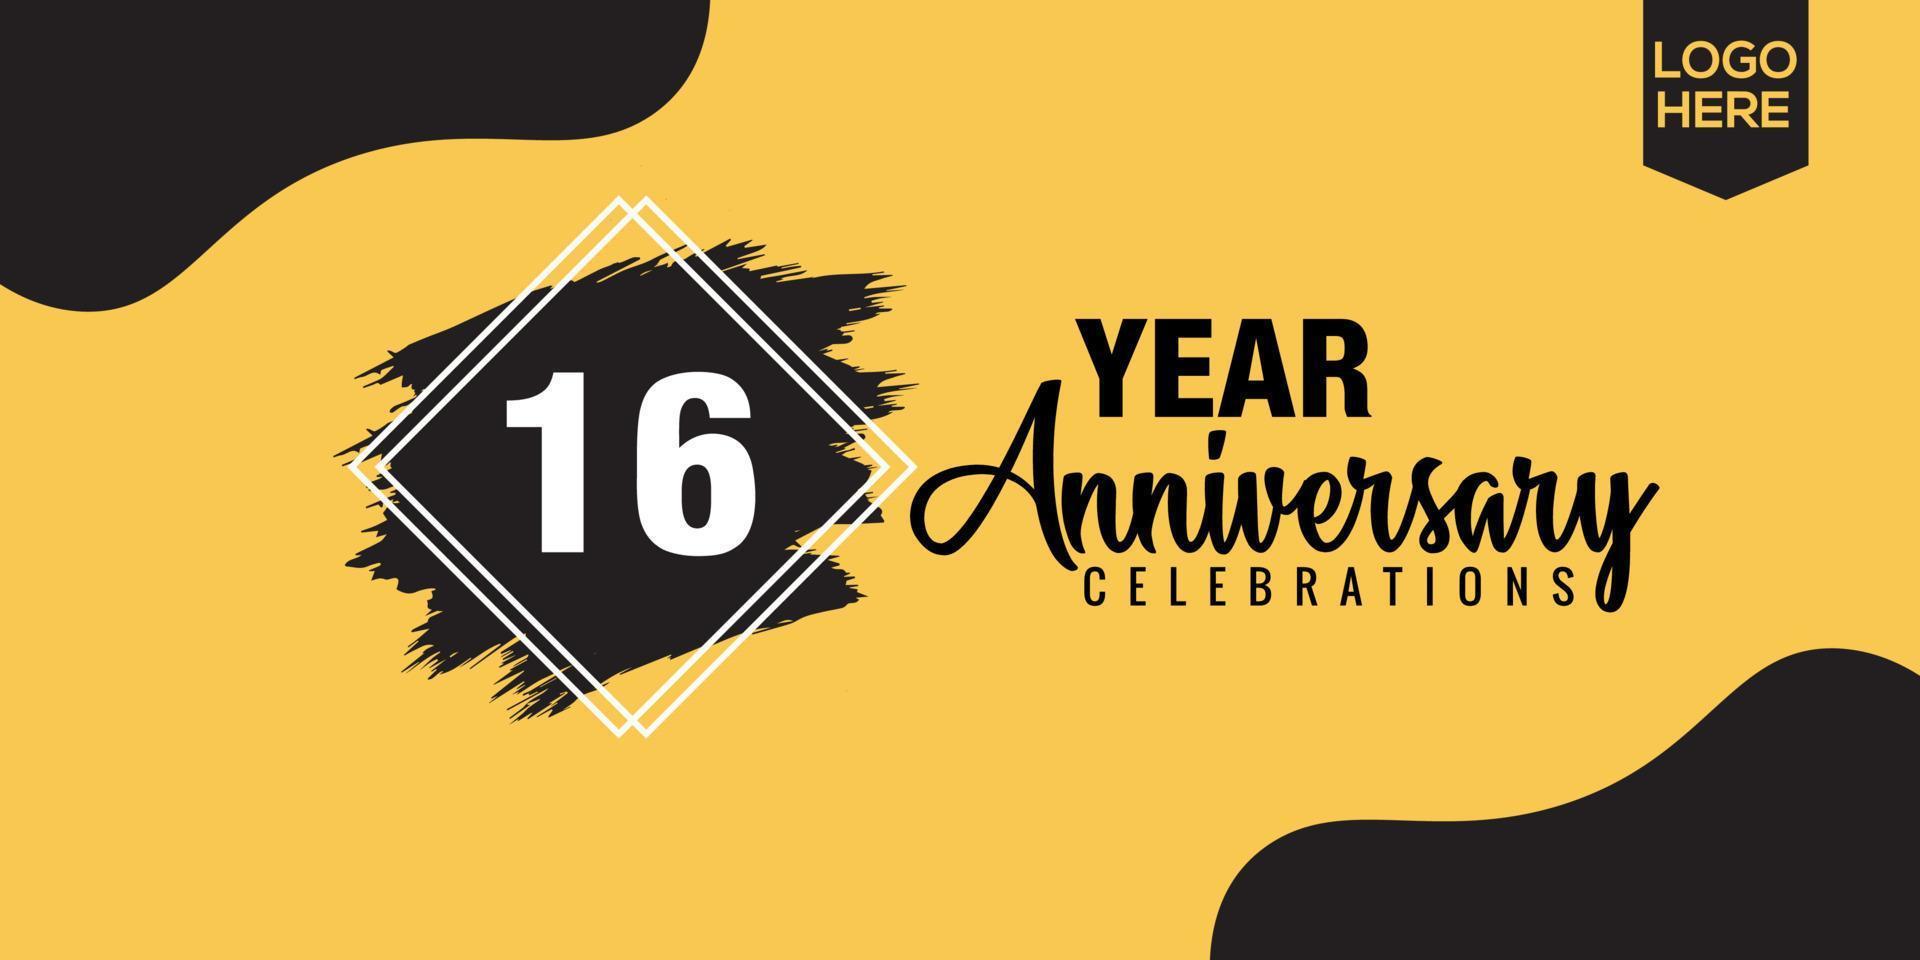 16th years anniversary celebration logo design with black brush and yellow color with black abstract vector illustration